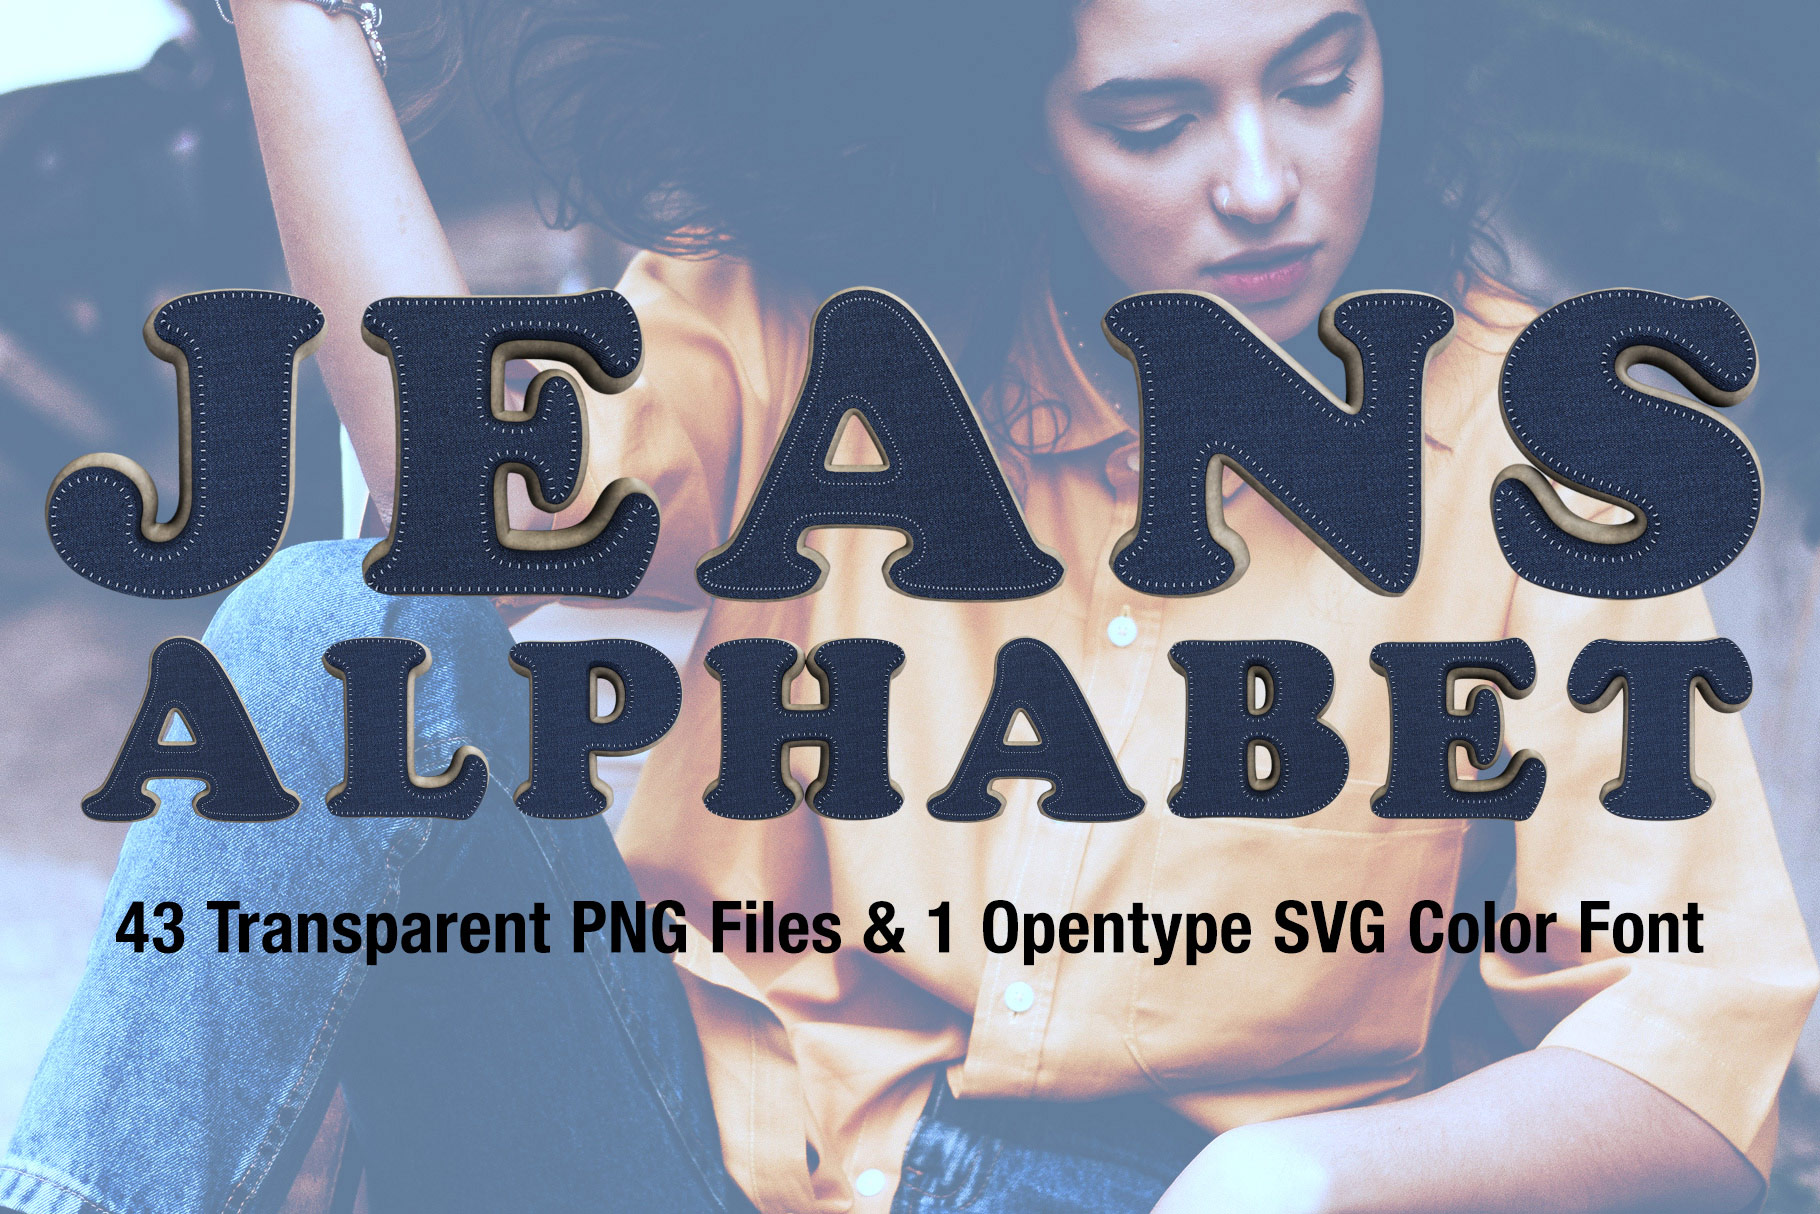 Cover image of Ms Jeans Opentype SVG Font and PNGs.